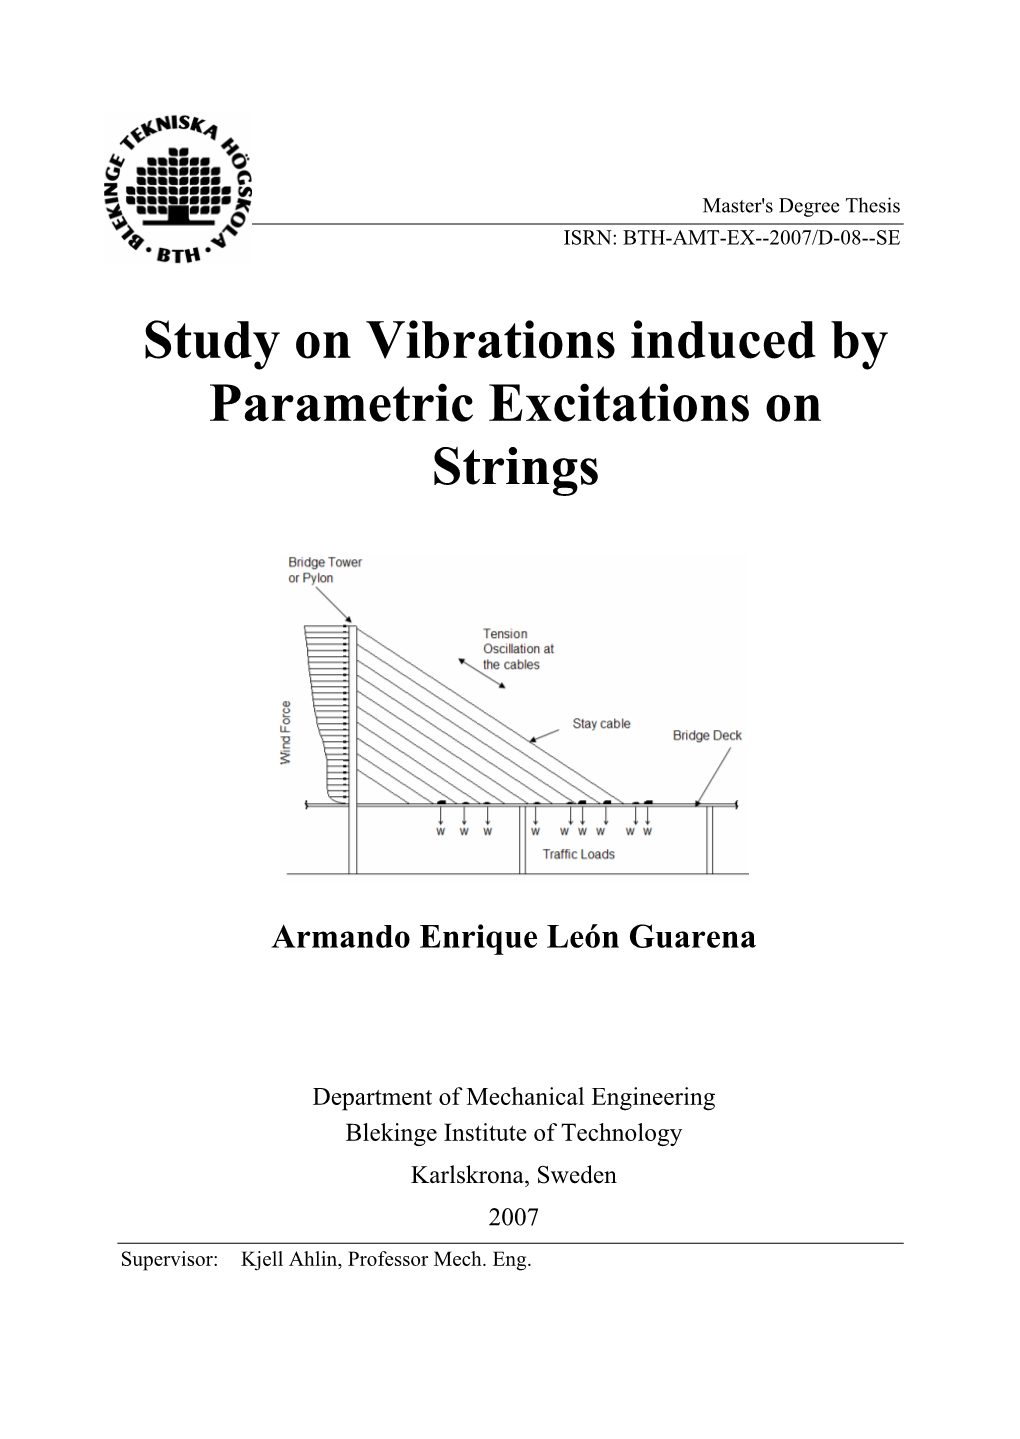 Study on Vibrations Induced by Parametric Excitations on Strings